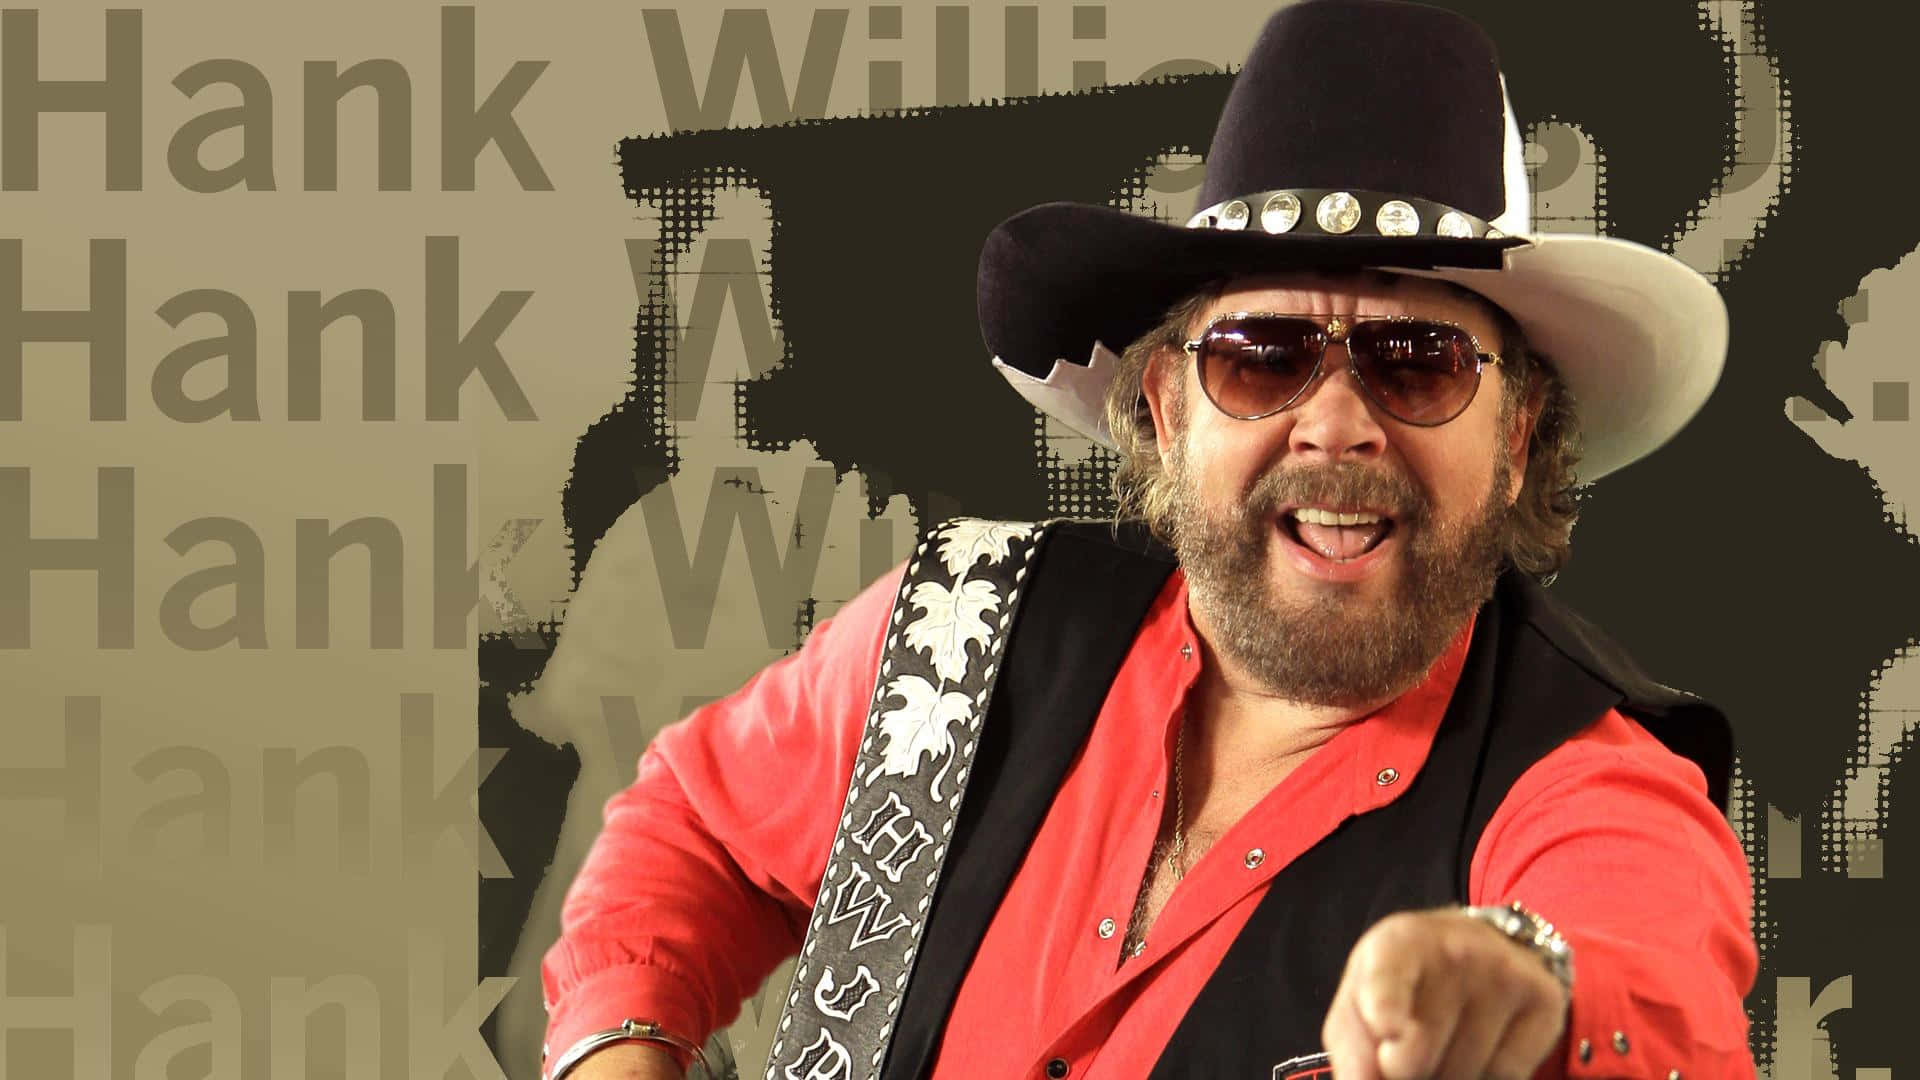 Hankwilliams Jr. Is An American Singer-songwriter And Musician. He Is The Son Of Country Music Legend Hank Williams. Hank Williams Jr. Has Had A Successful Career In Country Music, With Hits Like 